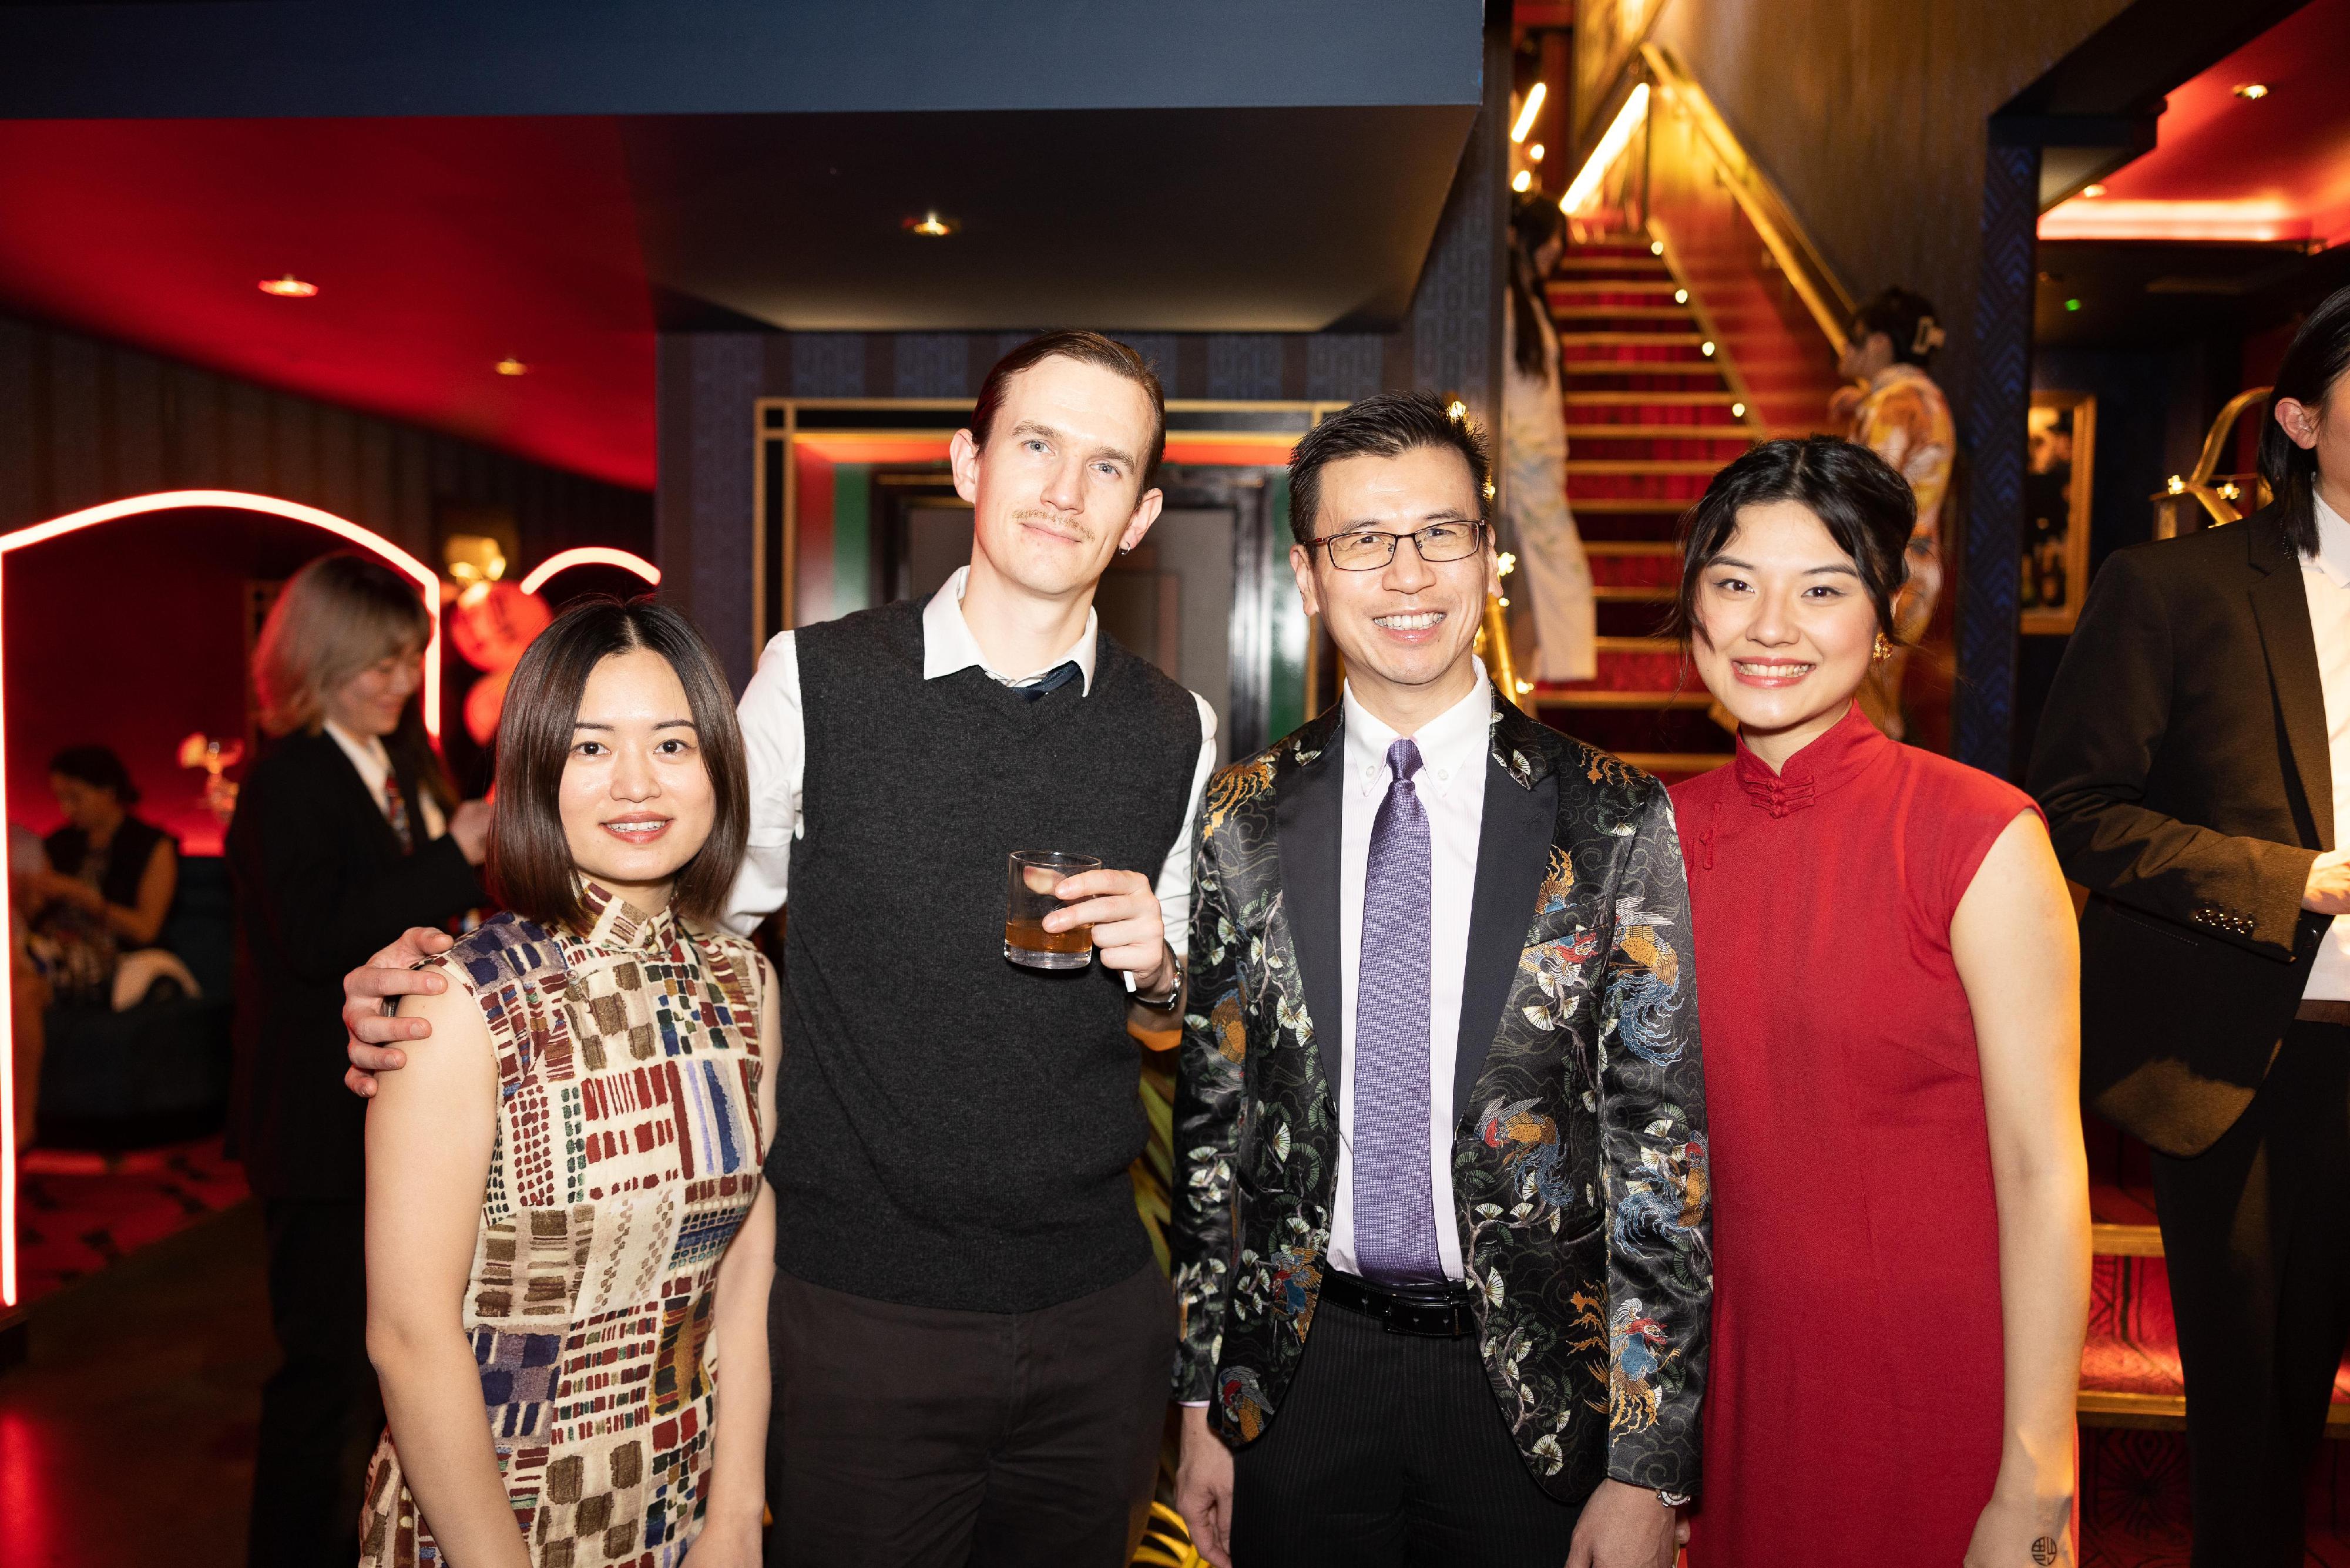 The Hong Kong Economic and Trade Office, London (London ETO)  supported the Chinese Cinema Project in staging an immersive screening of "In the Mood for Love" in London, the United Kingdom, on February 3 (London time) to showcase Hong Kong’s unique culture.  Photo shows （from left) Founder and Lead Curator of the Chinese Cinema Project, Ms Millie Zhou; Head Film Curator at The Garden Cinema, Dr George Crosthwait; the Director-General of London ETO, Mr Gilford Law and Film Curator, Chinese Cinema Project, Ms Yao Tu at the opening screening.